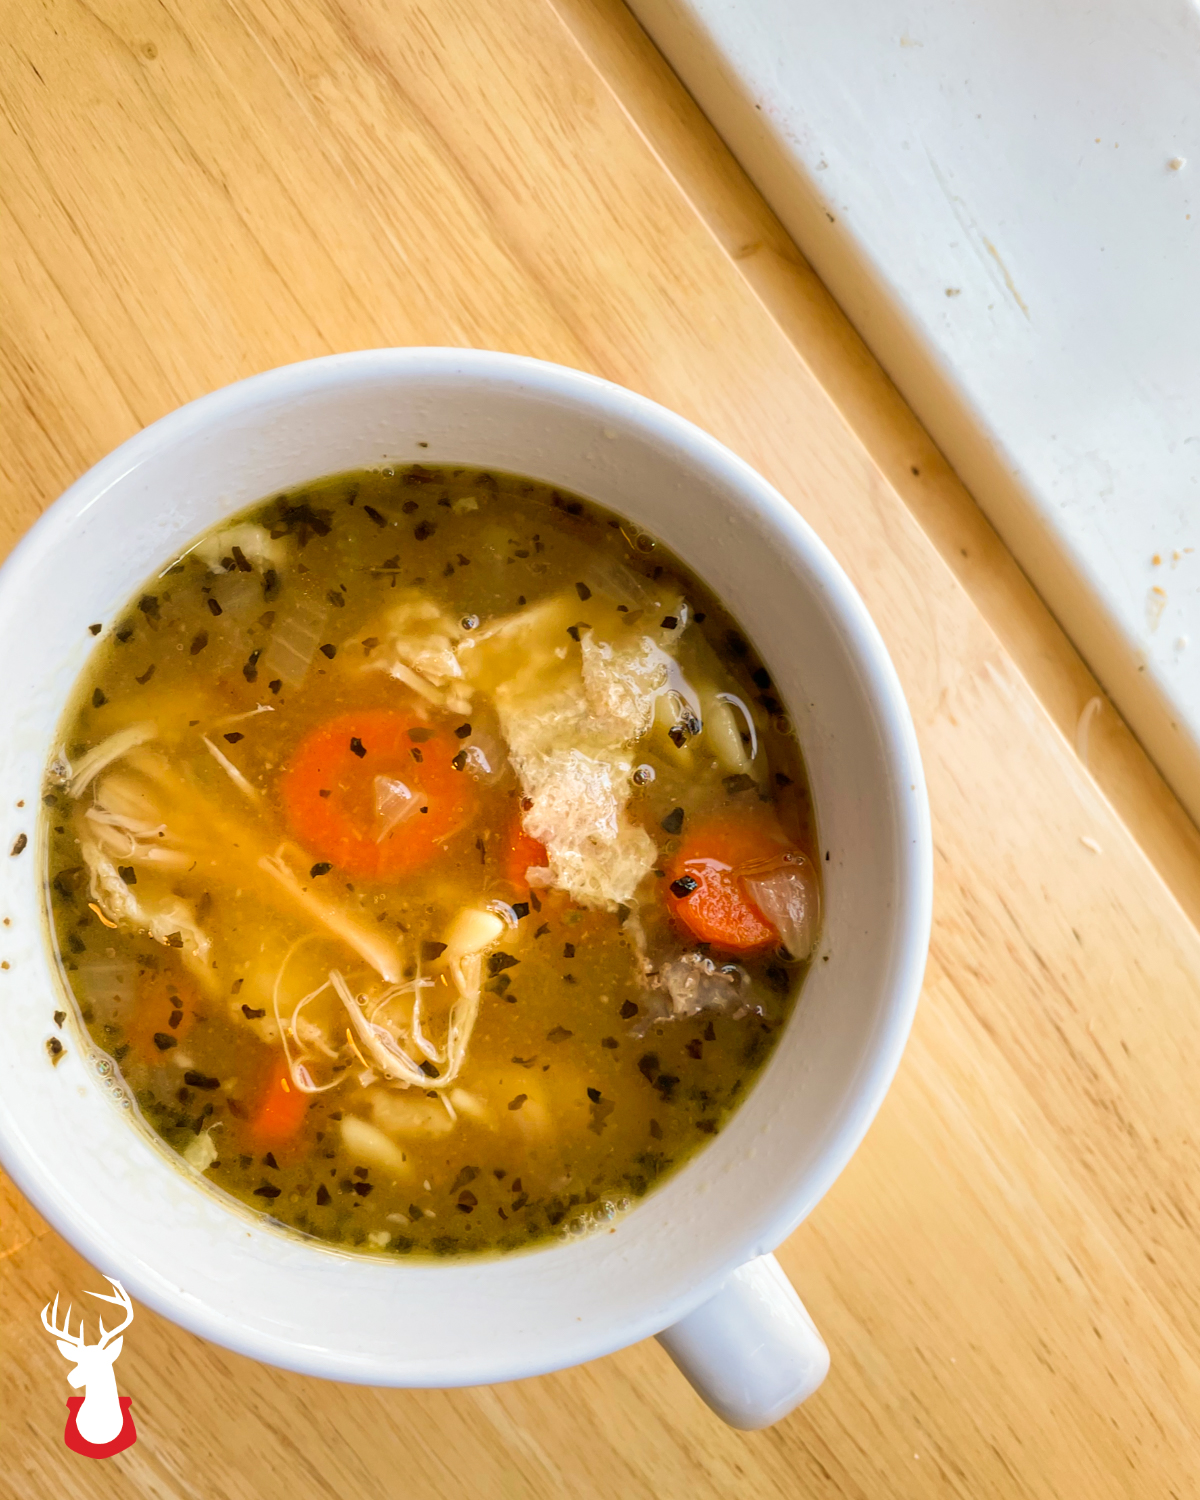 We make this soup about once per week for lunches.